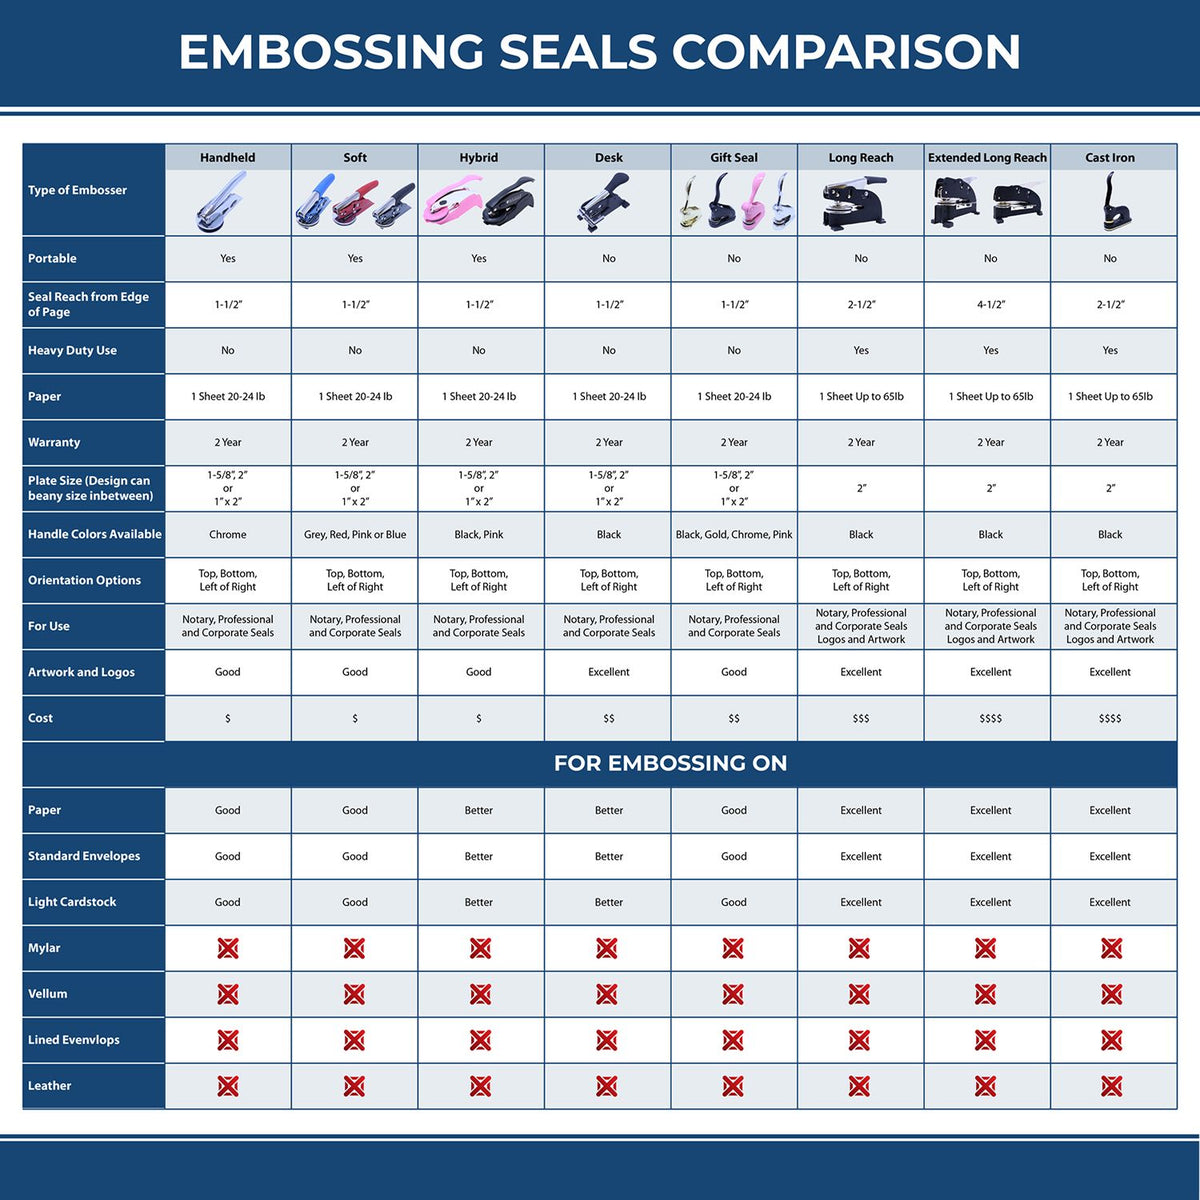 A comparison chart for the different types of mount models available for the Handheld Virginia Professional Engineer Embosser.